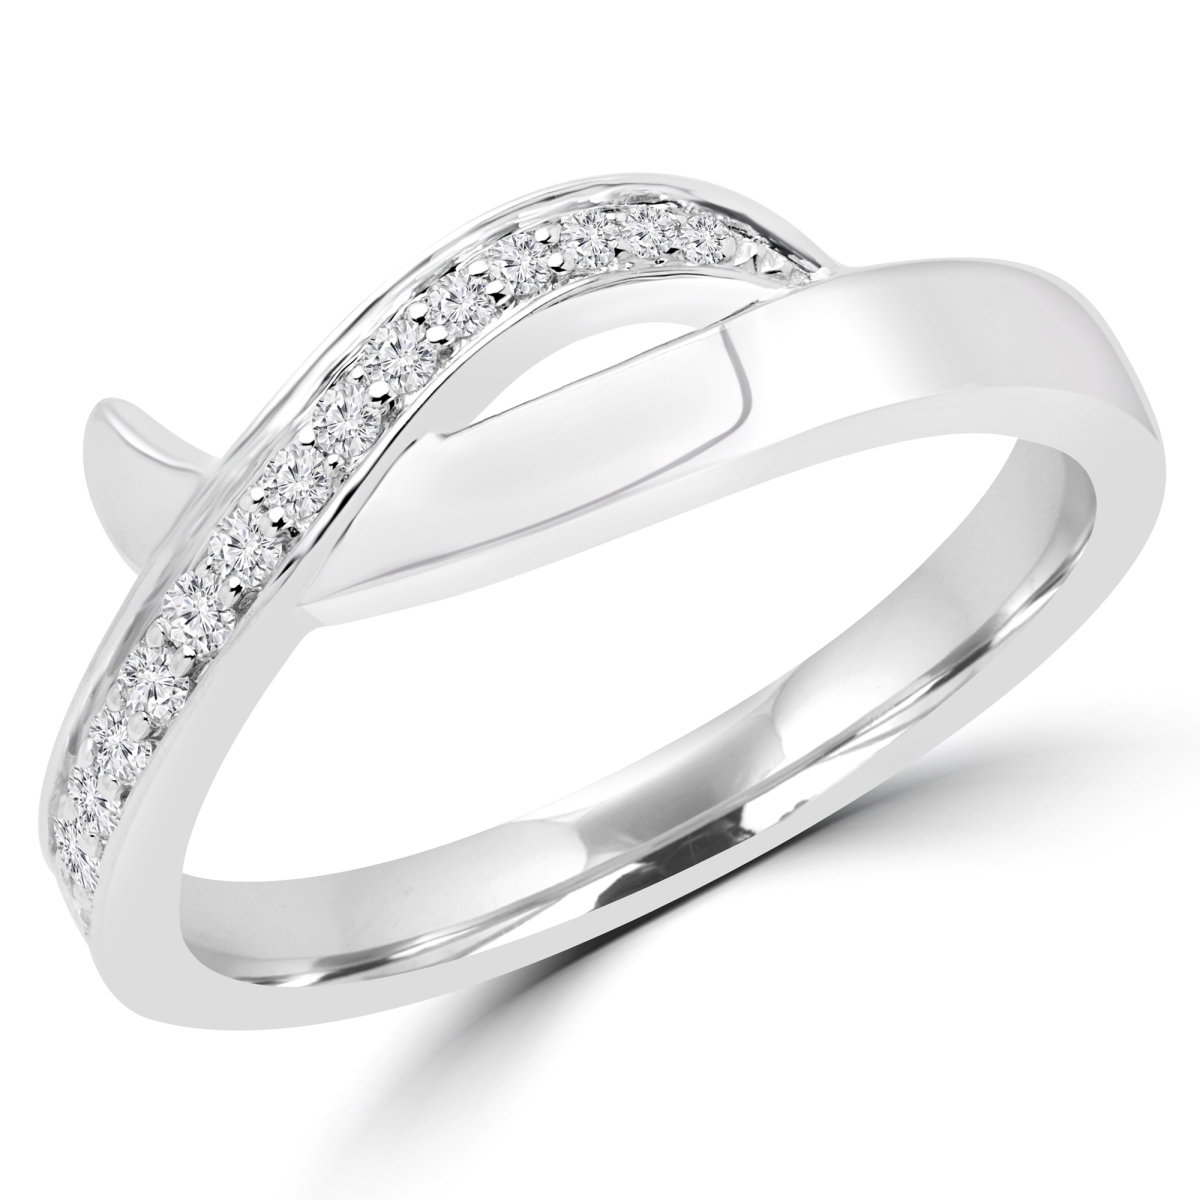 Picture of Majesty Diamonds MDR170054-9 0.16 CTW Round Diamond Cocktail Ring in 14K White Gold - 9